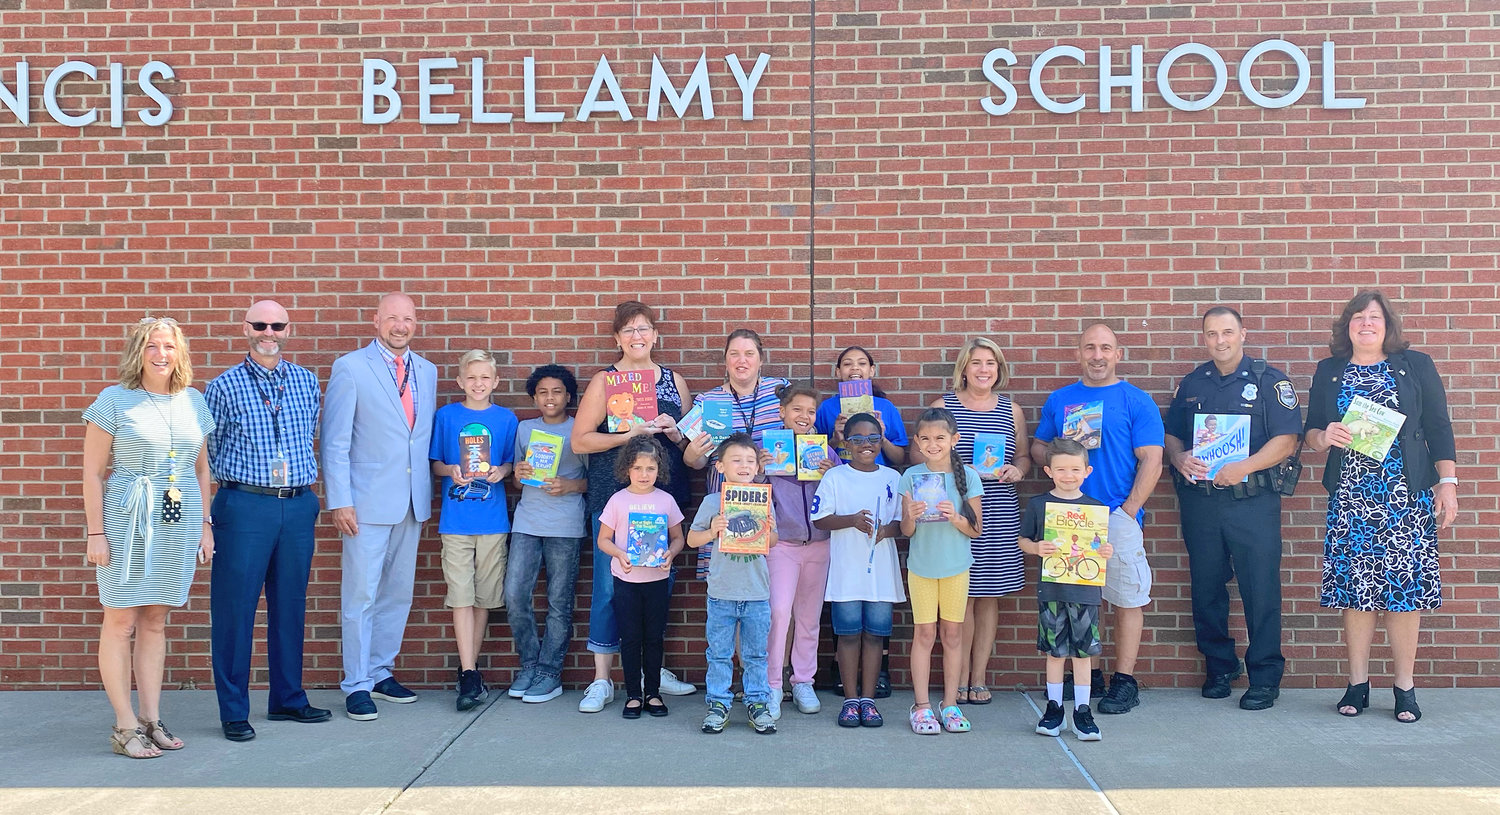 Assemblywoman Marianne Buttenschon, D-119, Marcy, announced the beginning of the New York State Assembly’s 2022 Summer Reading Challenge with a visit to Bellamy Elementary School in Rome.